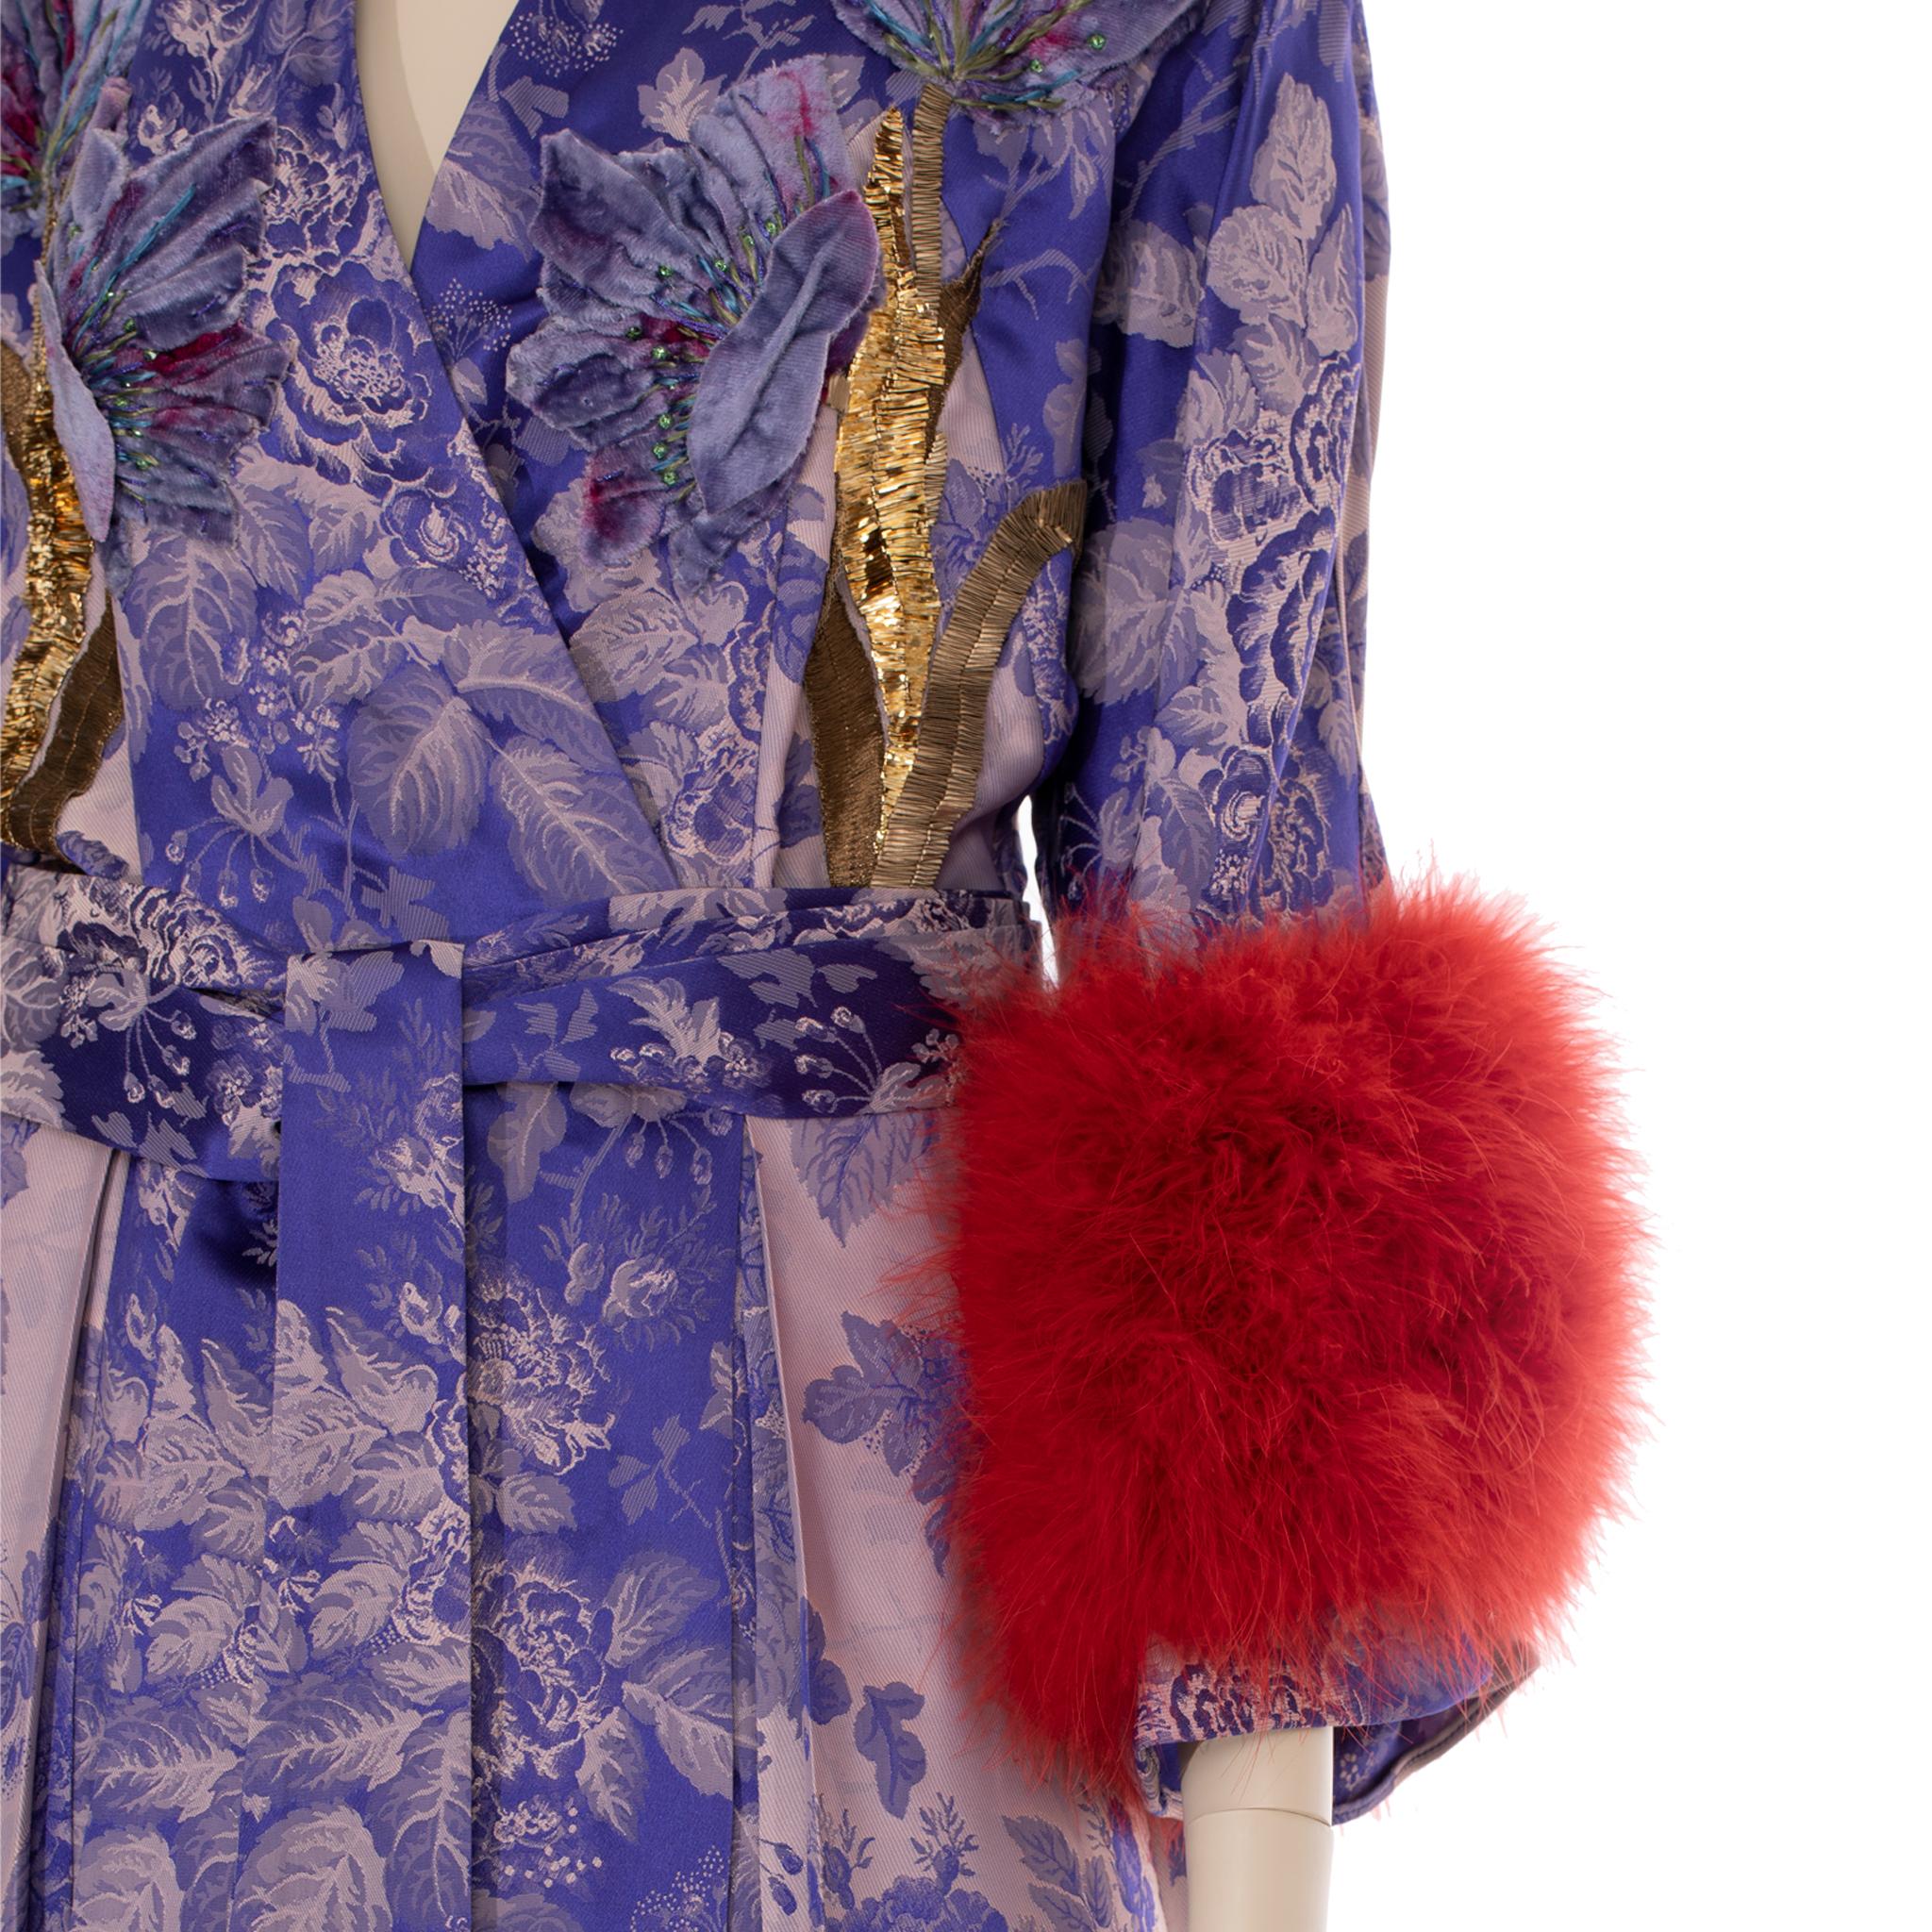 Upscale your wardrobe with this Gucci Floral Jacquard Wrap Dress With Ostrich Feathers. This dress is luxuriously finished with delicate ostrich feathers for a look that will take you from day to evening in style. It's an exemplary piece of